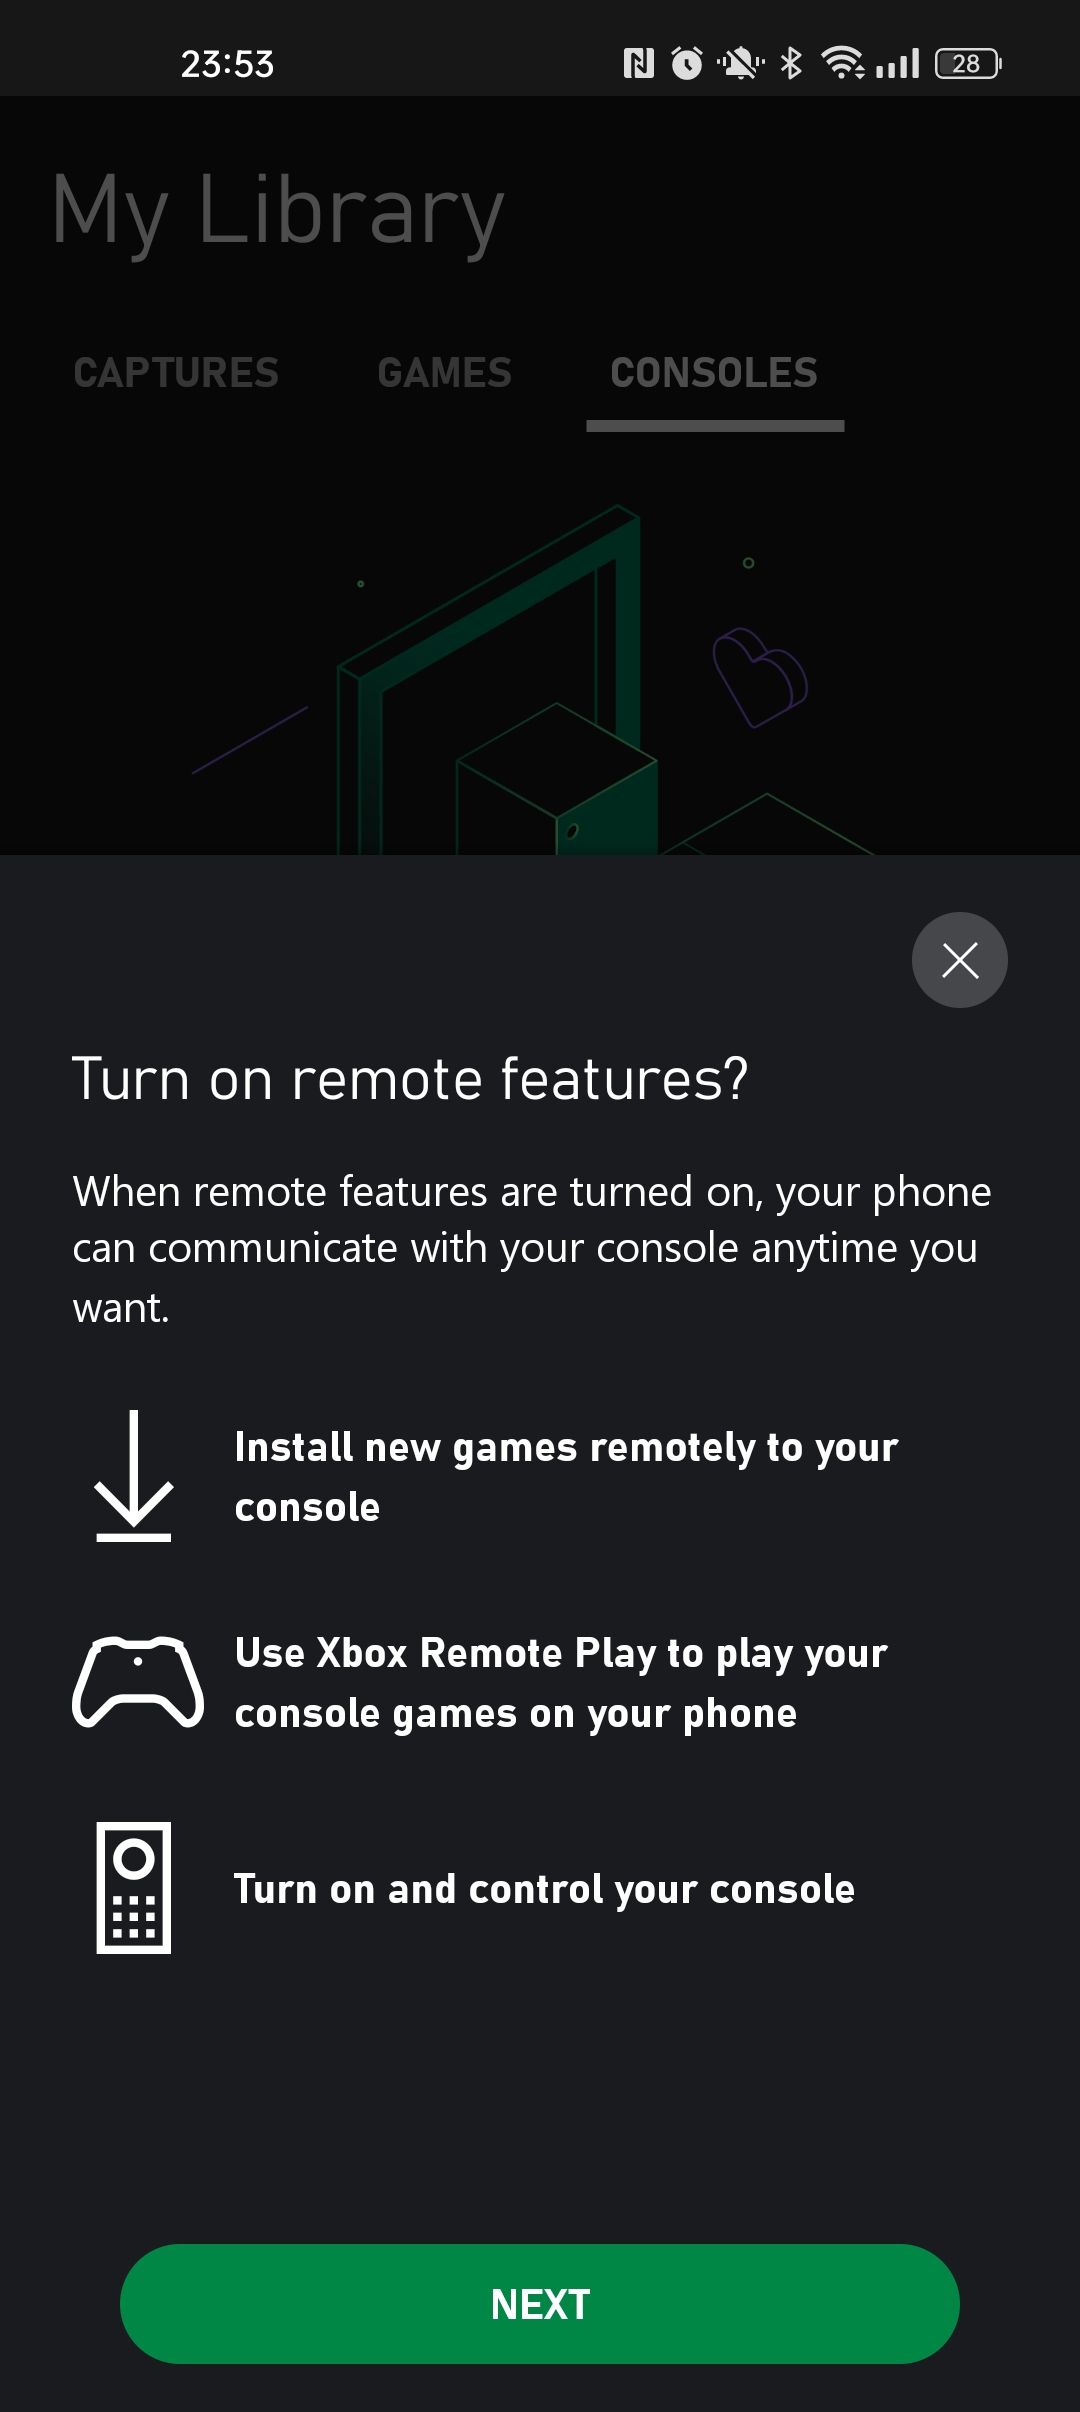 A mobile screenshot of the Remote Features prompt on the Xbox App for Android 